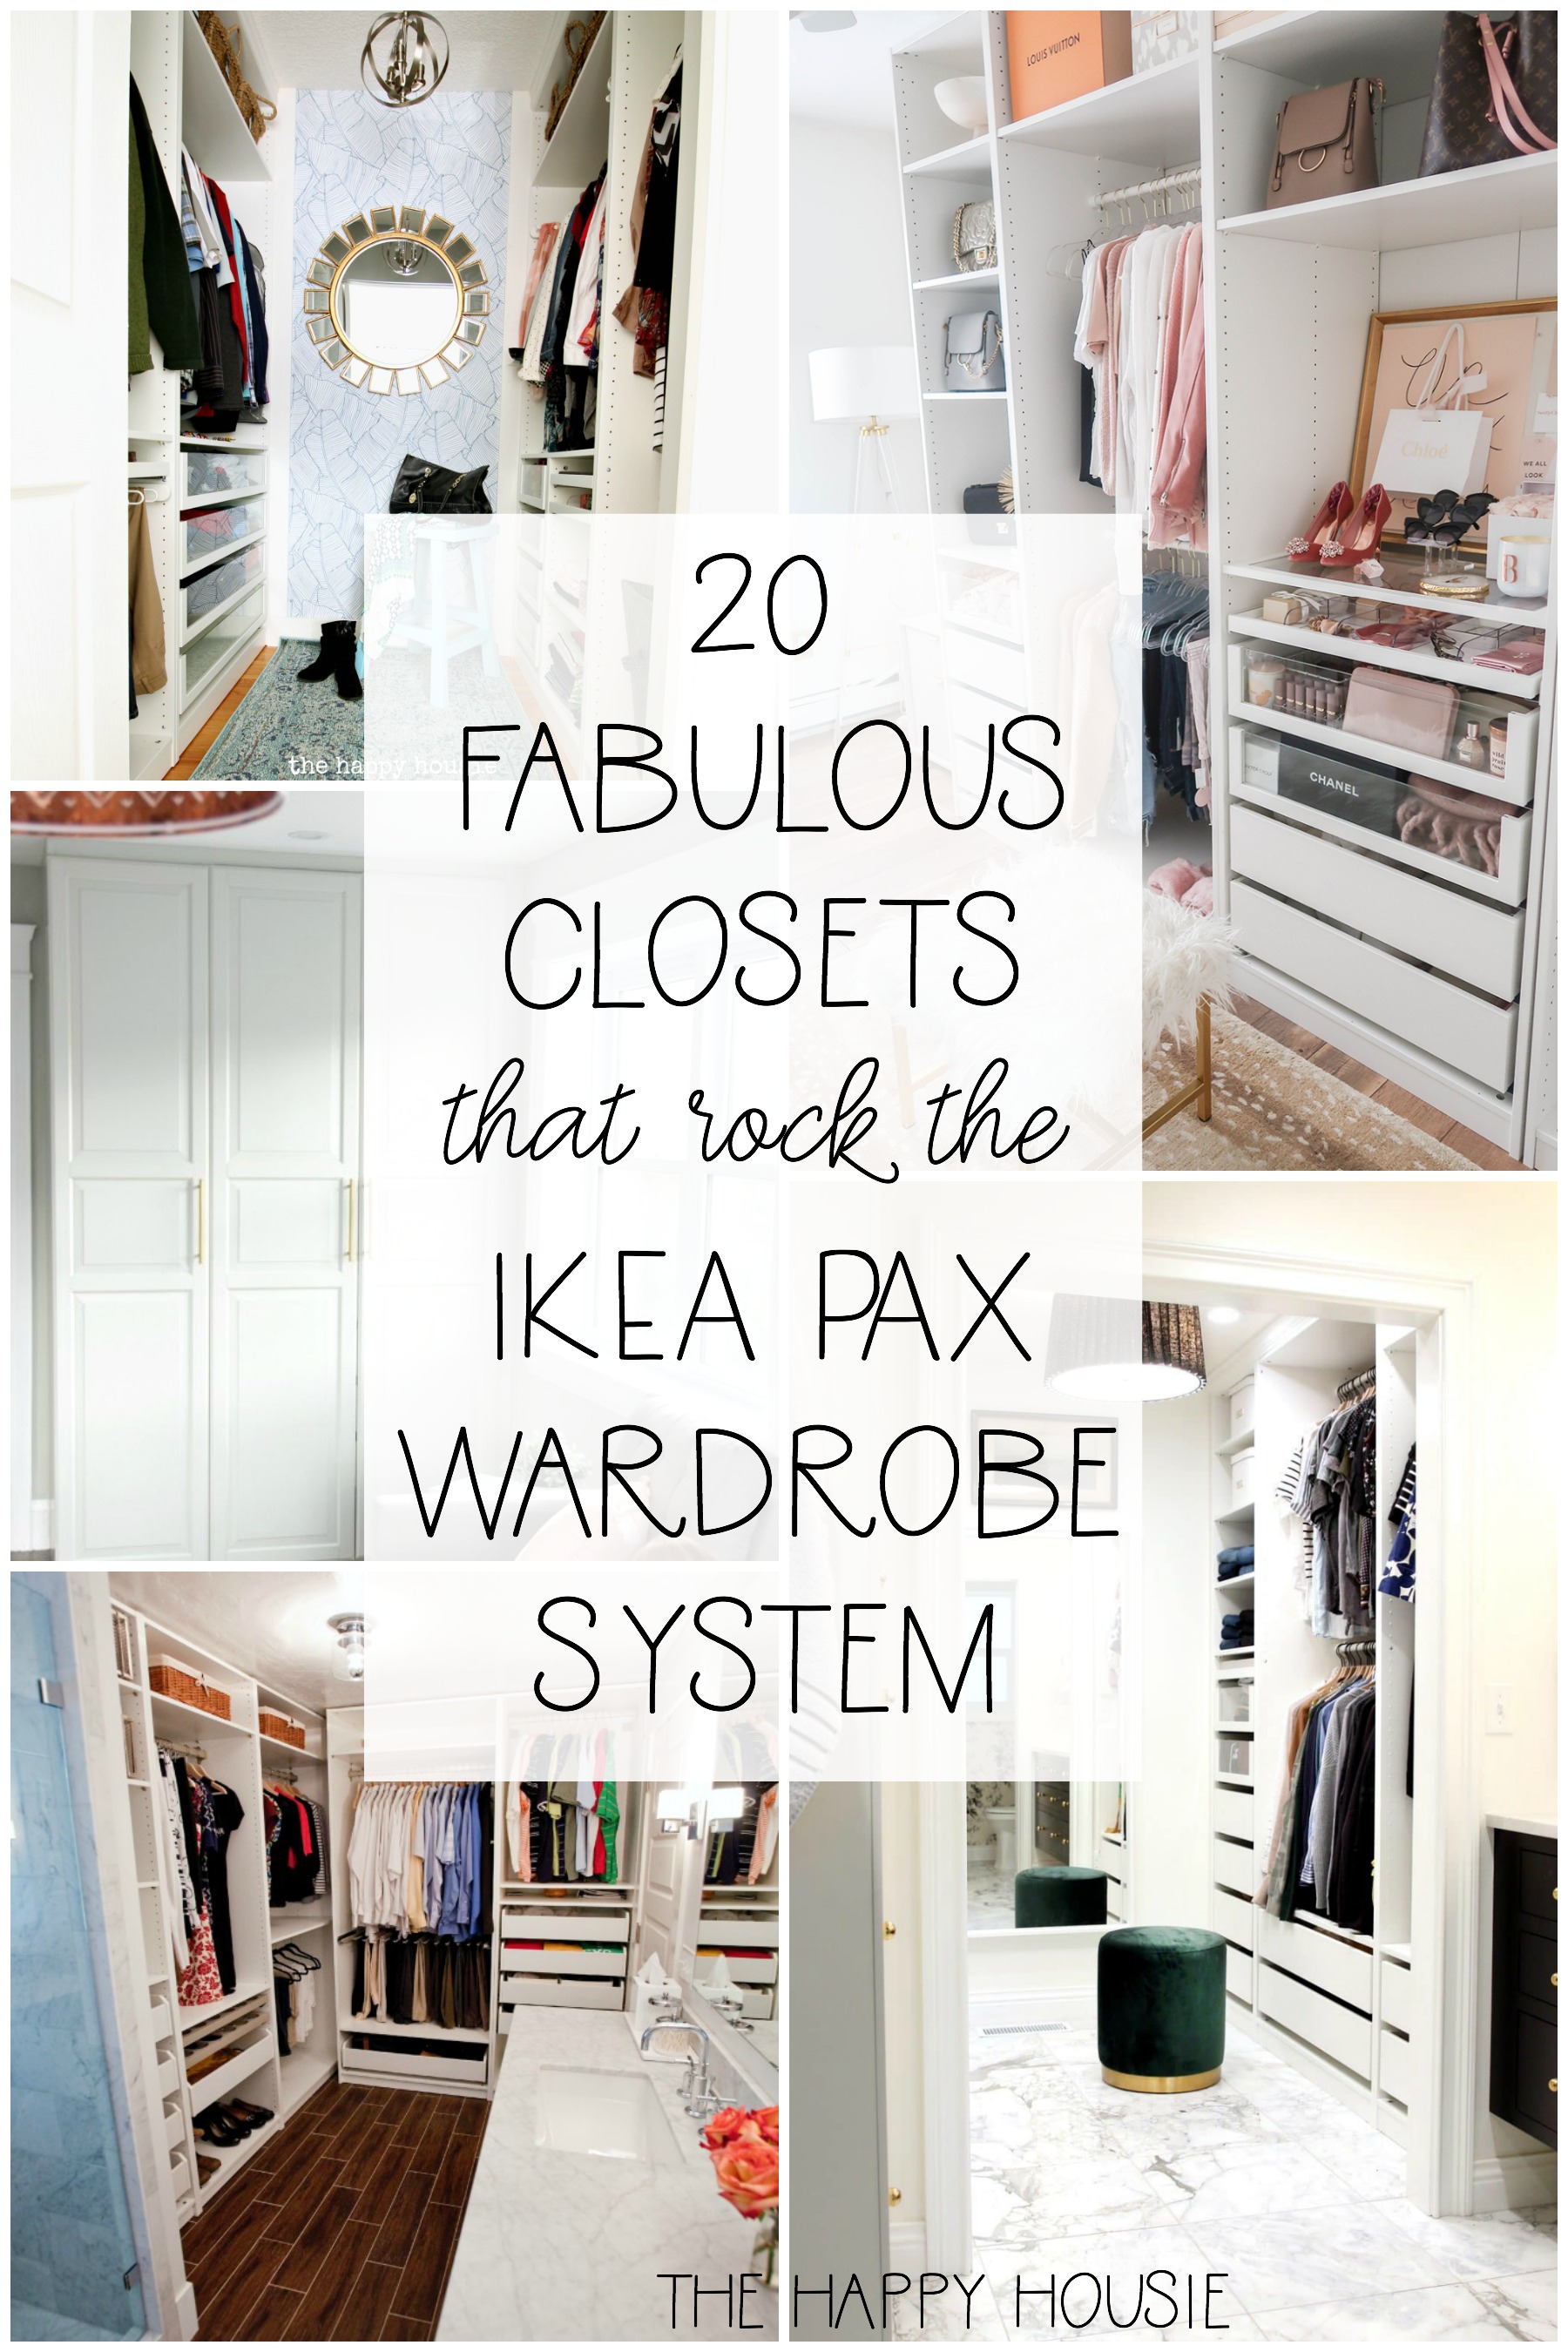 a collection of over twenty different organized closets that use the Ikea PAX wardrobe system for highly functional clothing storage